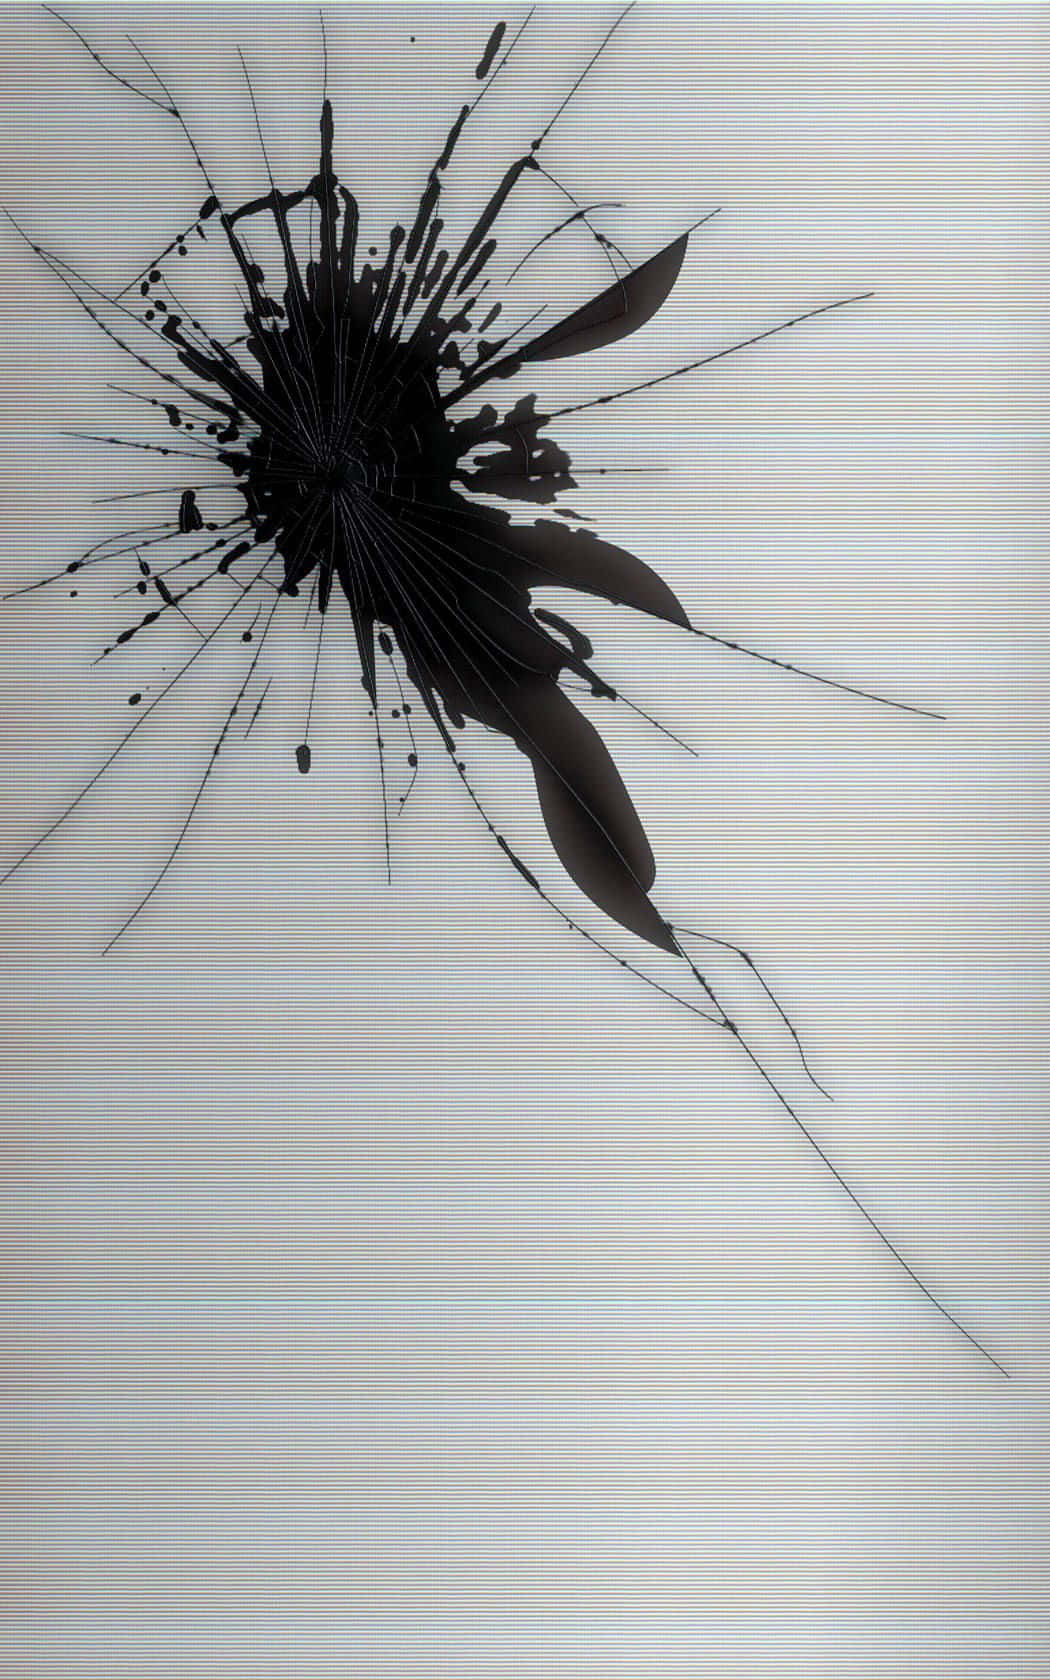 Iphone Cracked Screen Black Hole Wallpaper